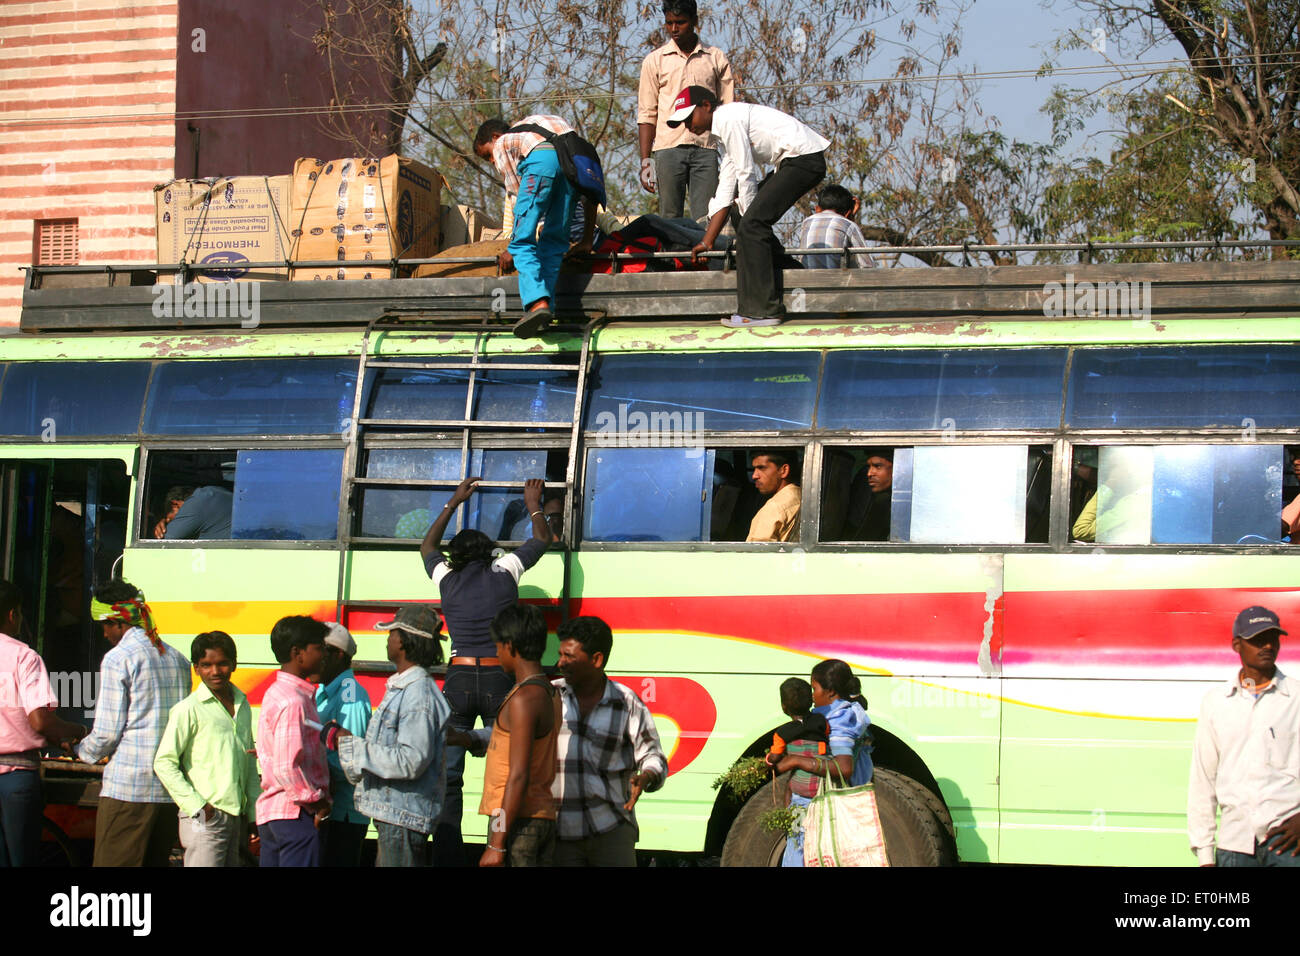 Passengers Indian men and women climbing on top of bus local transport for inter city transport destination in Jharkhand India Stock Photo